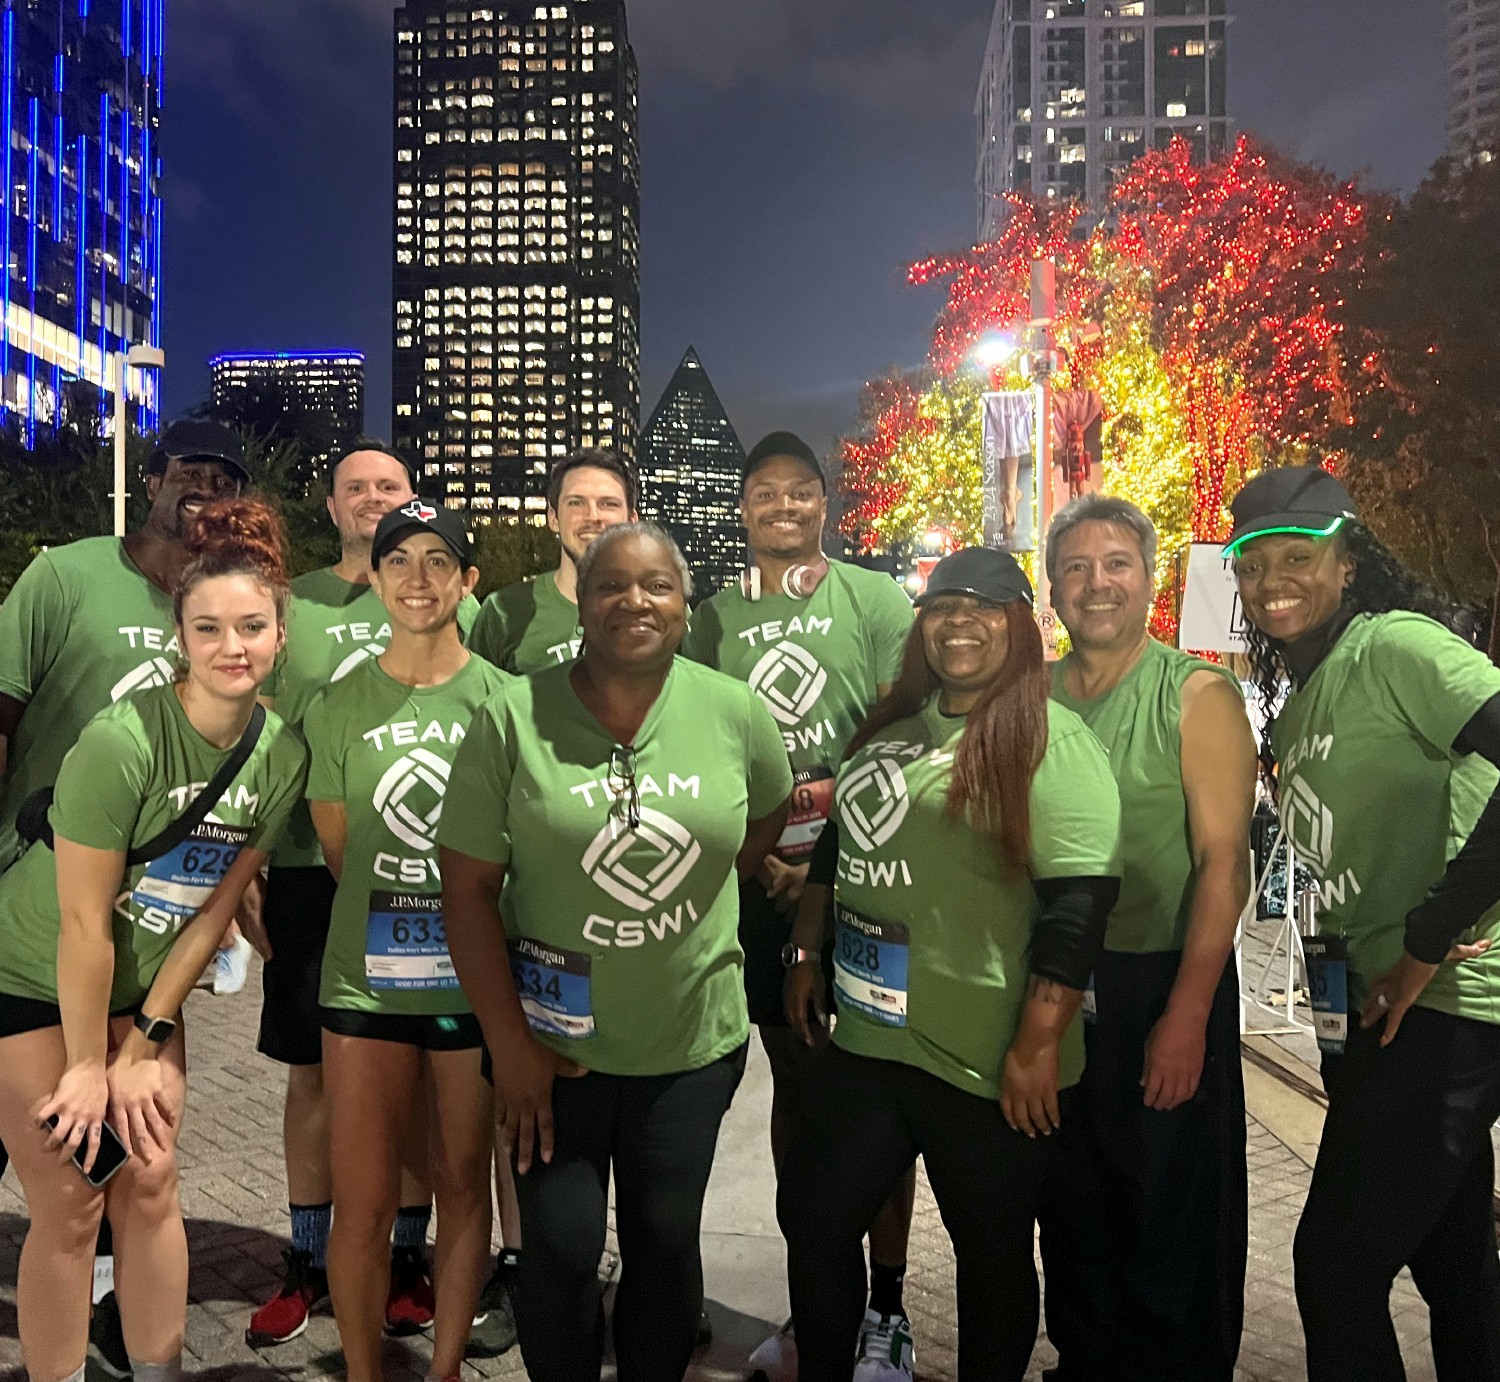 As part of an award-winning wellness program, Team CSWI participates in the J.P. Morgan Corporate Challenge in Dallas.